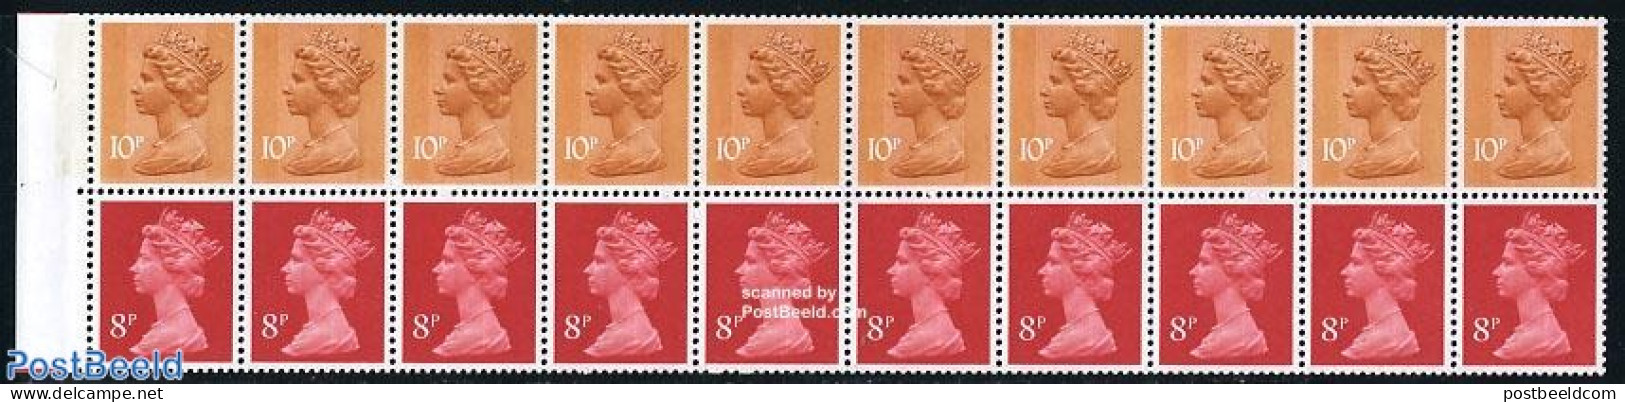 Great Britain 1979 Definitives Booklet Pane, Mint NH - Unused Stamps